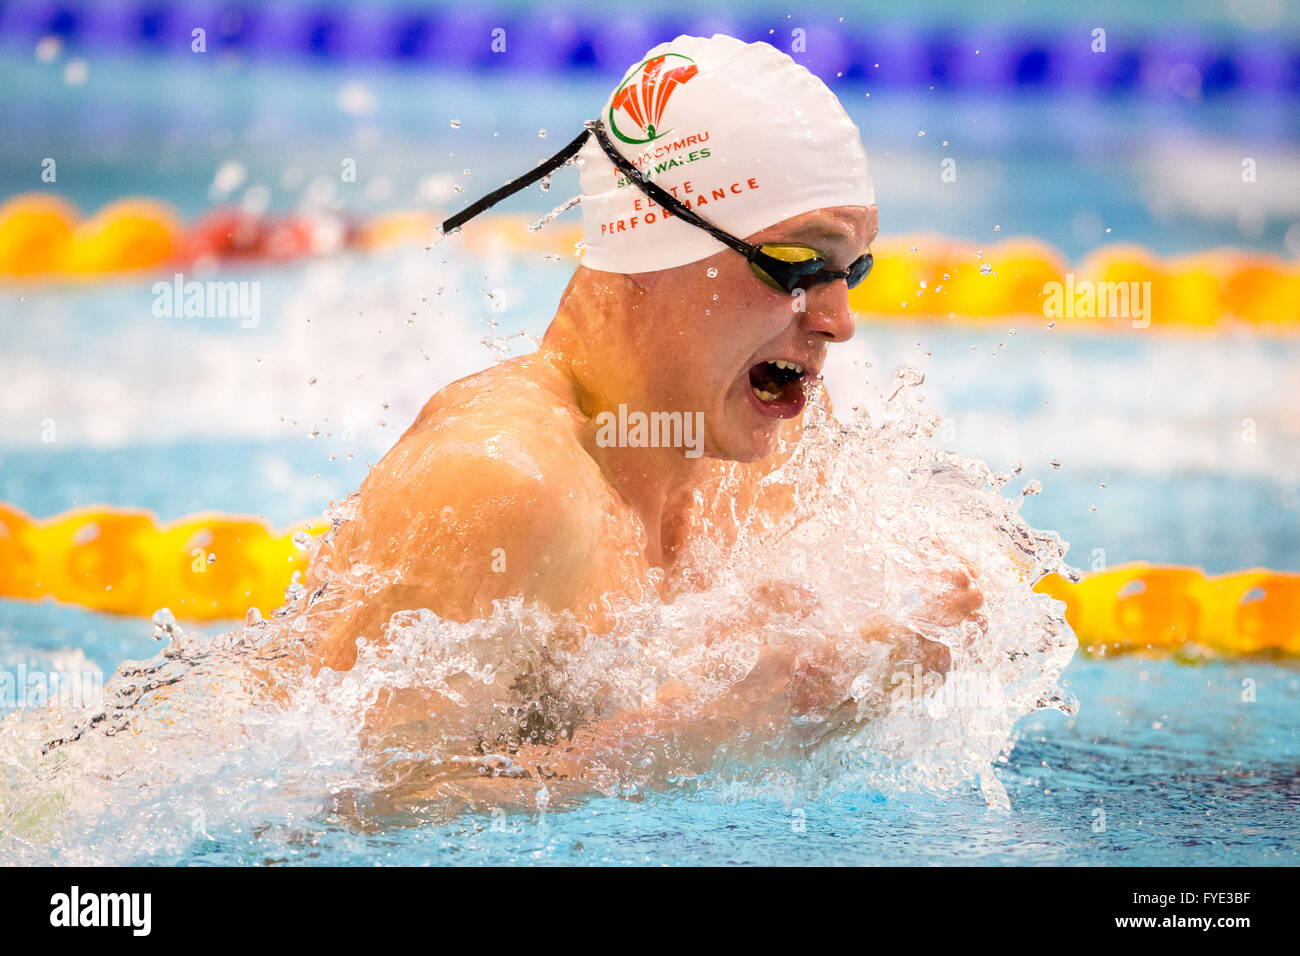 GLASGOW, UK: April, 23, 2016 Aaron Moores sets new world record on way to qualifying for Rio. Stock Photo